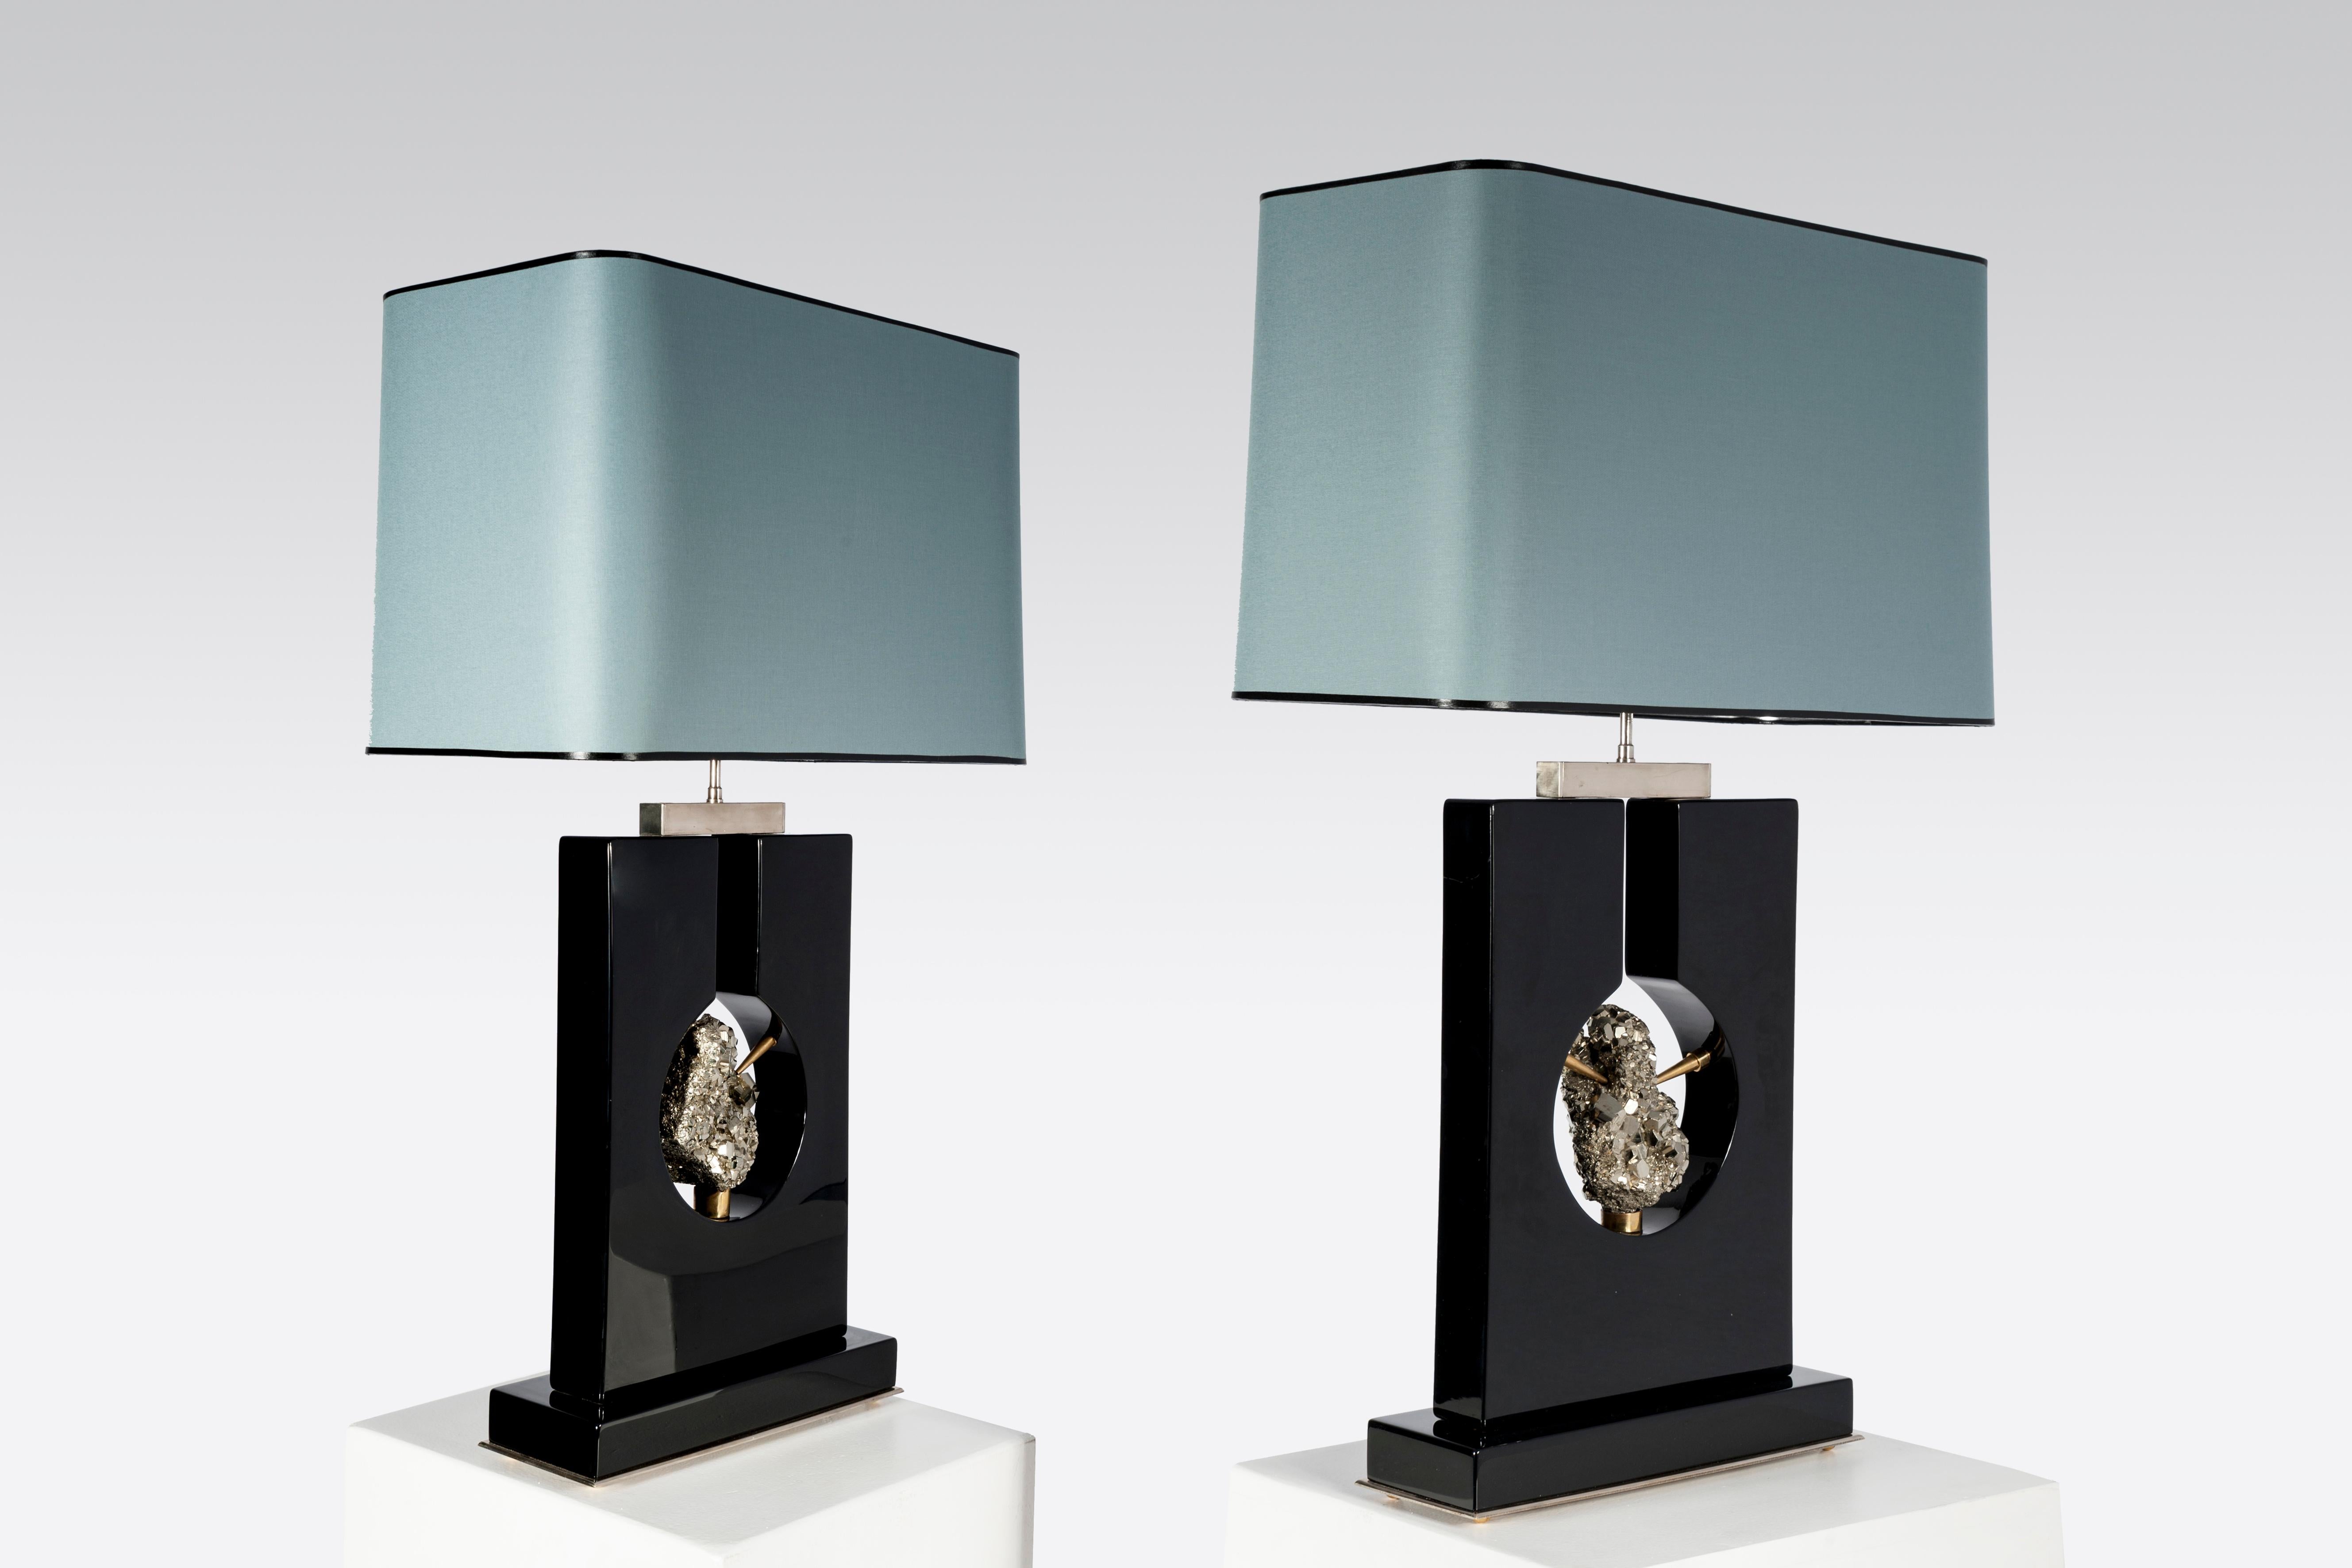 Created to measure by Stan Usel, this pair of twin black resin table lamps inserted with a mixed gold and silver pyrite harbored in each piece gives, when put together aside, a great sense of complementarity . Exceptional craftsmanship with the art